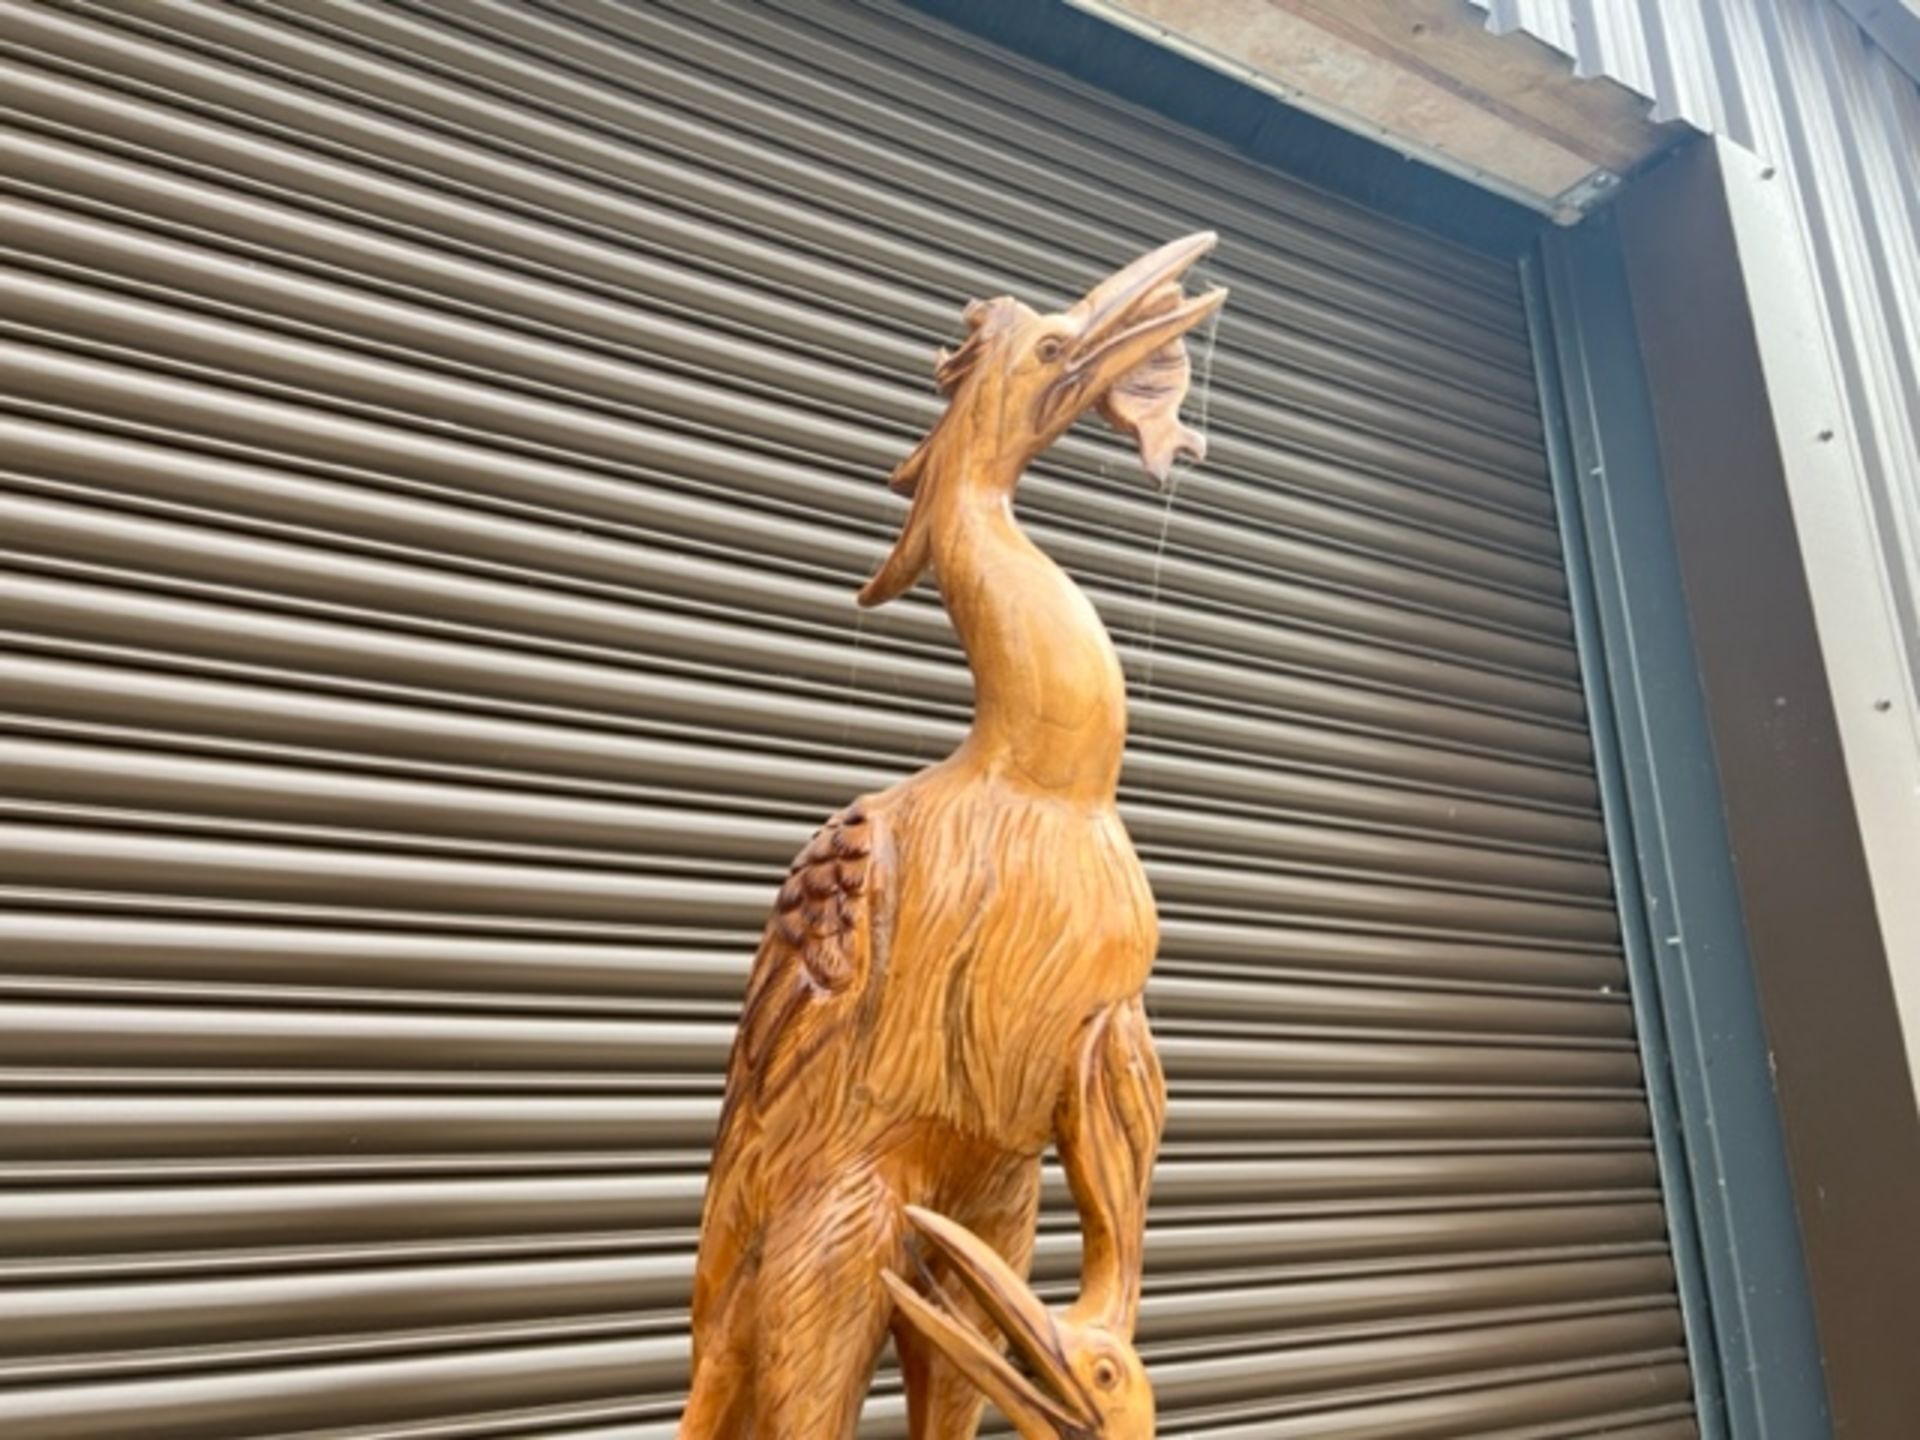 7Ft Tall Wooden Carving Depicting Birds Feeding